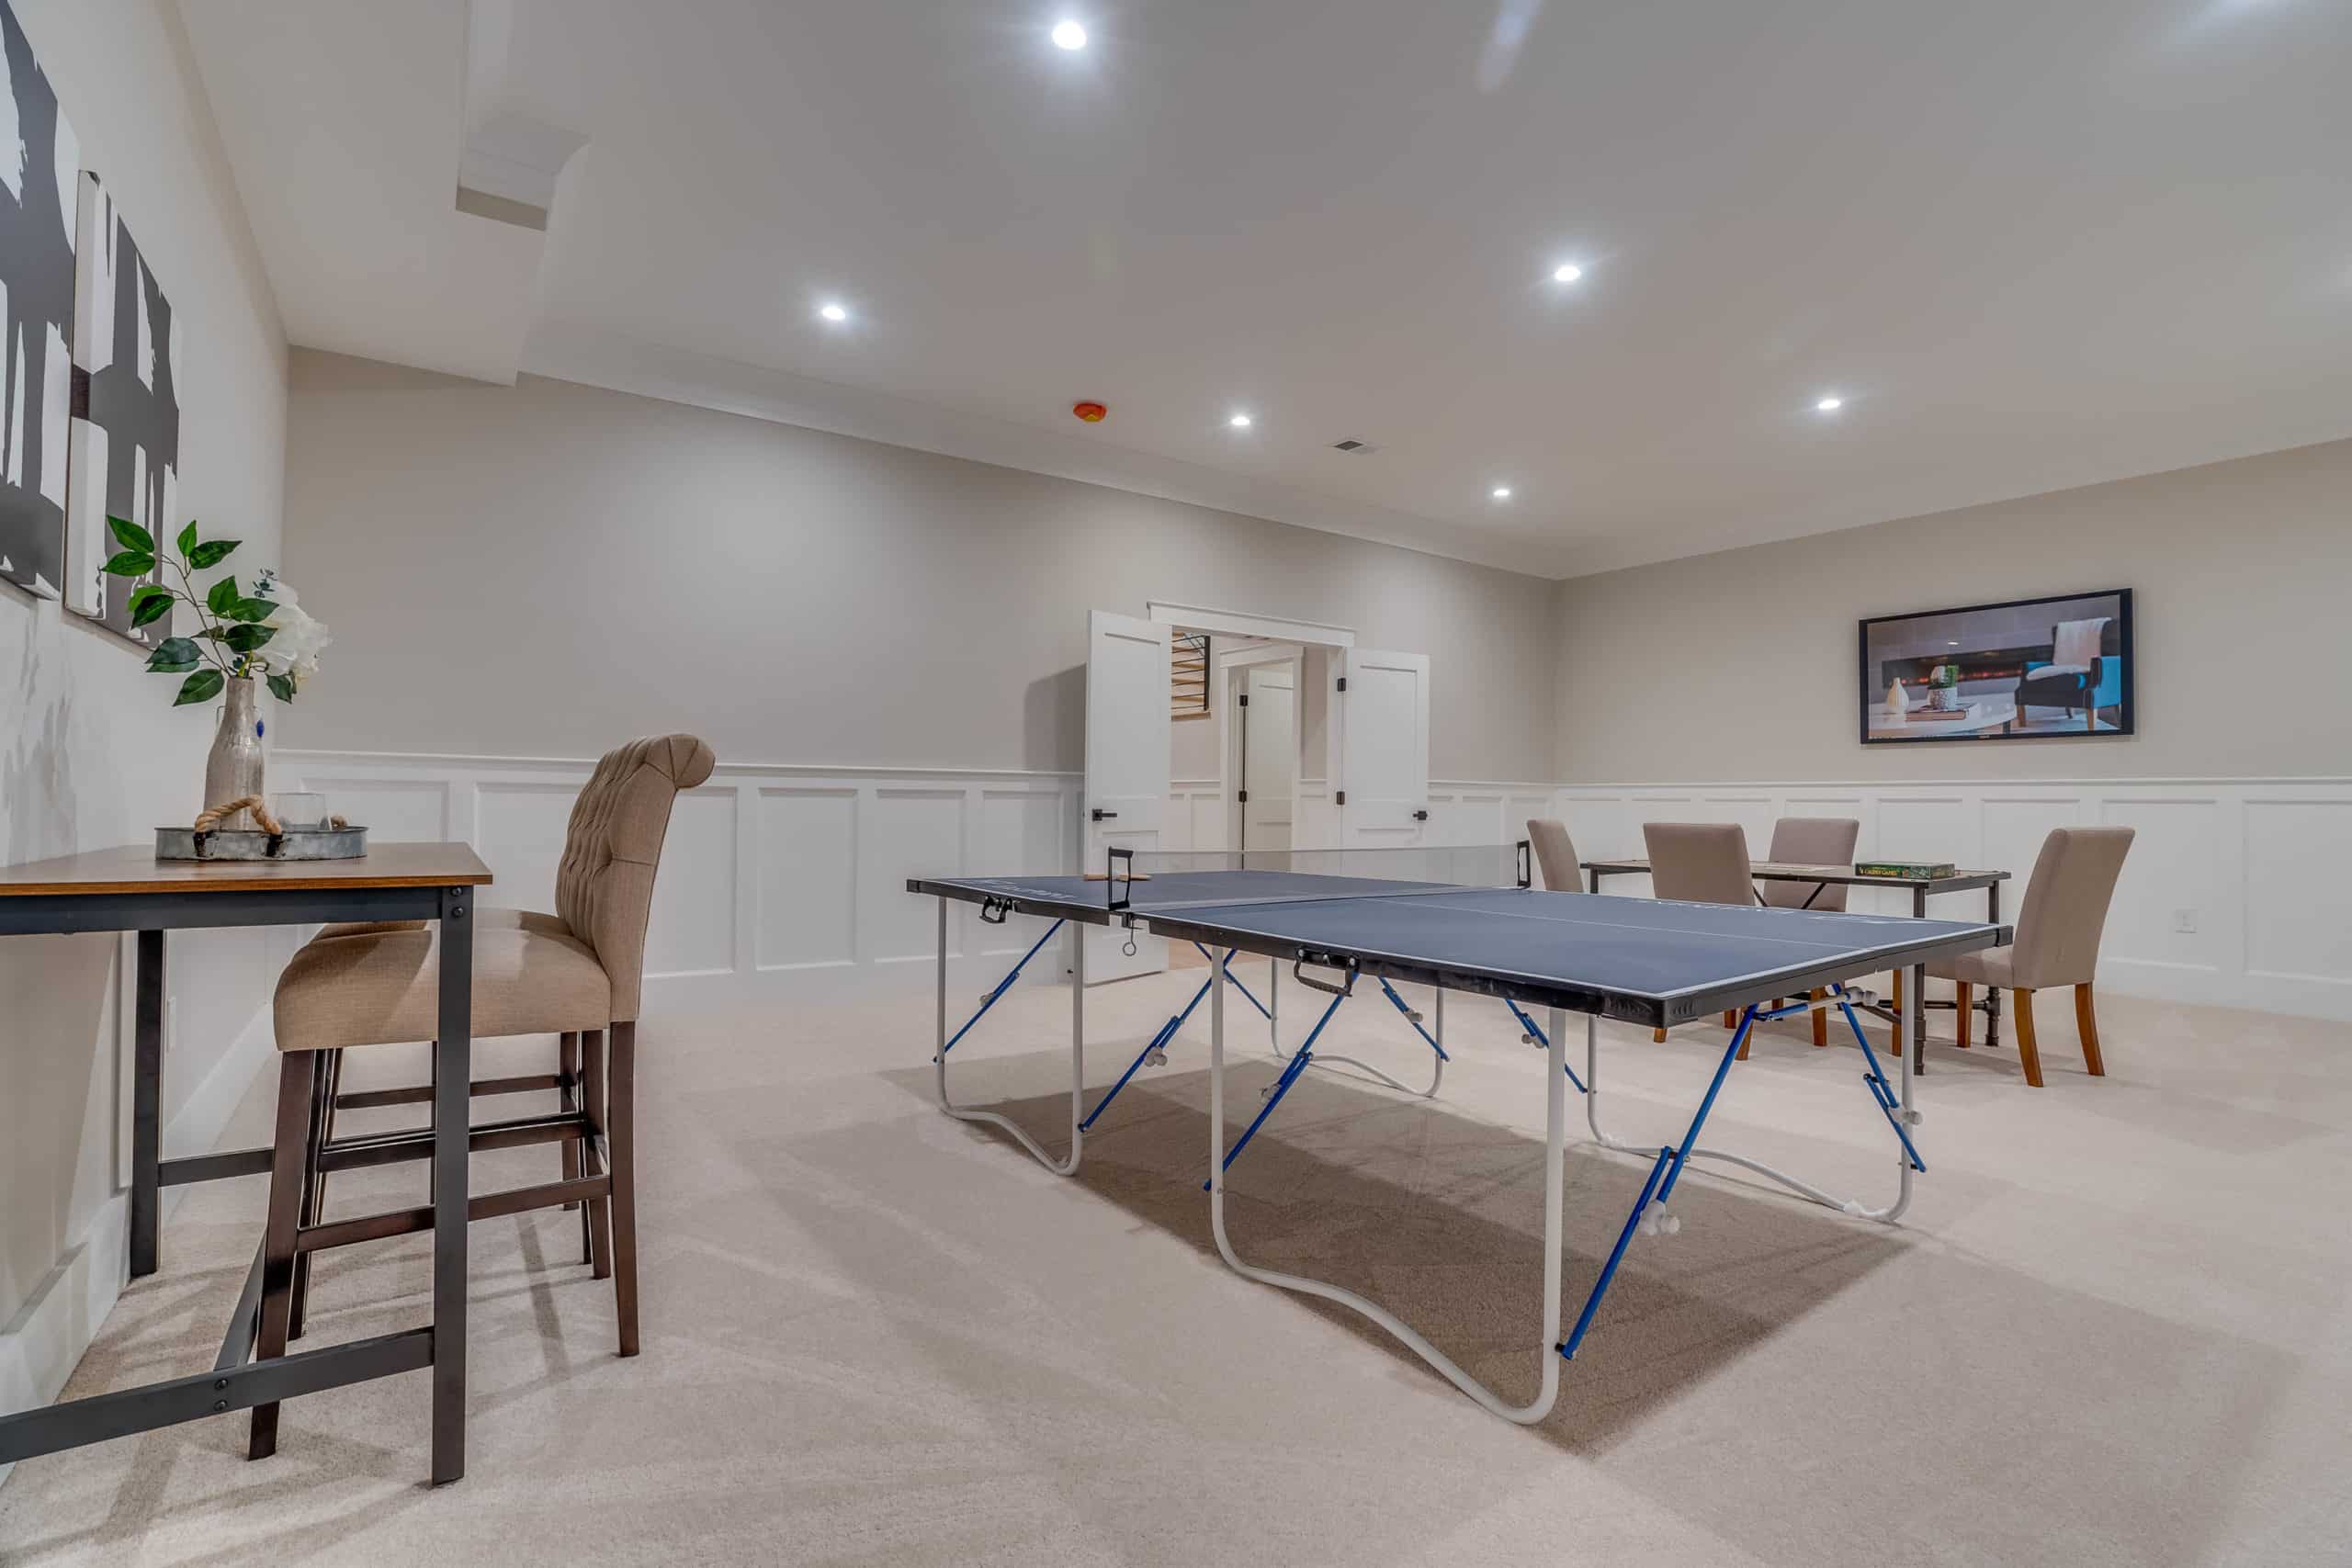 Open area in basement with table tennis, dining table, TV, and side table.